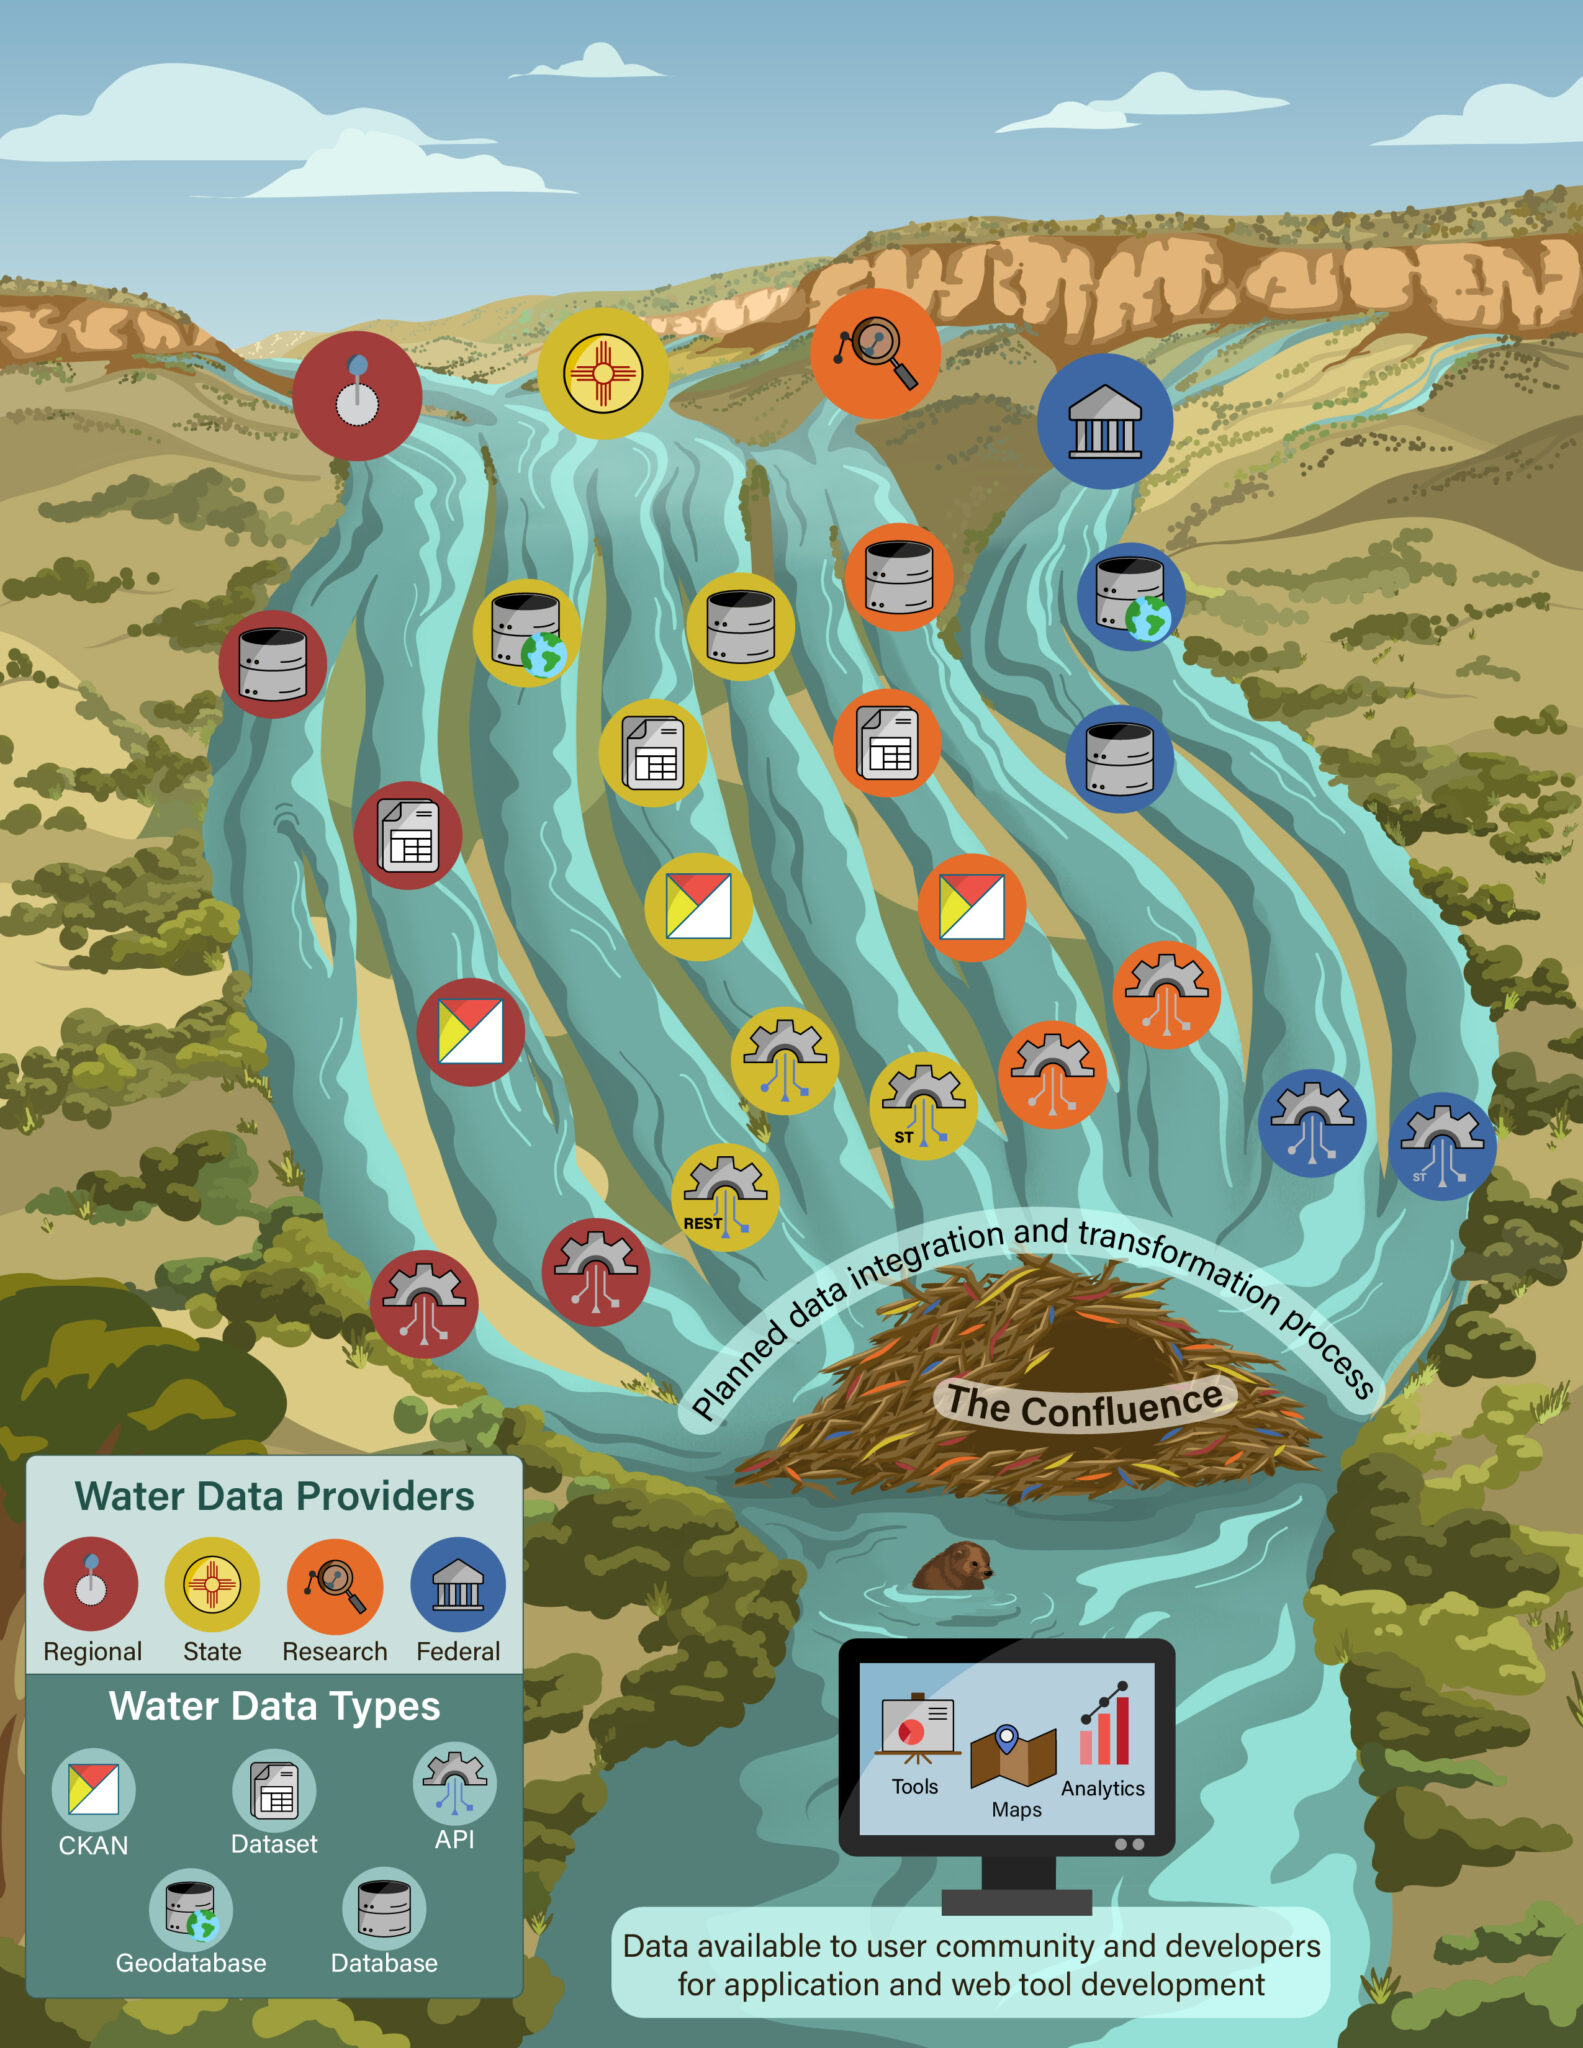 Water data stream science visualization graphic showing multiple factors of planned data integration and transformation for New Mexico Water Data Providers.